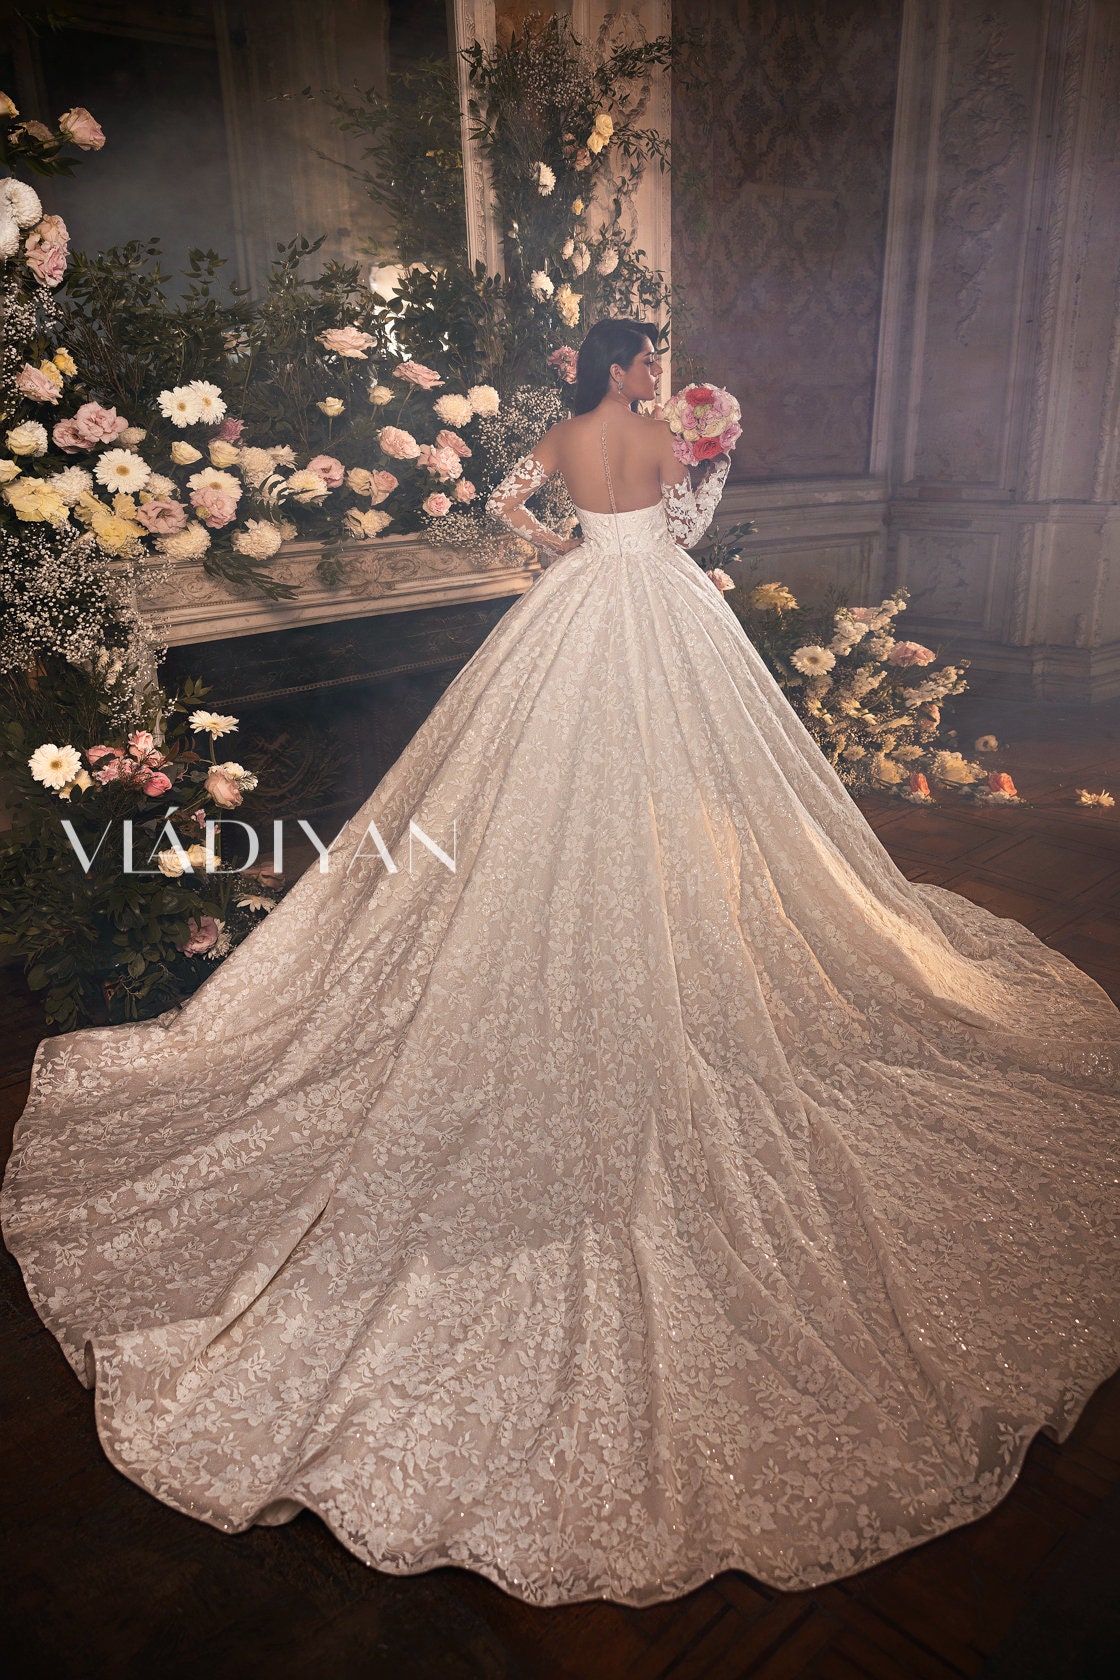 Royal Luxury Princess Queen Long Sleeve Pointed Sweetheart Neckline Wedding Dress Bridal Gown Ball Gown Long Train Illusion Lace Style